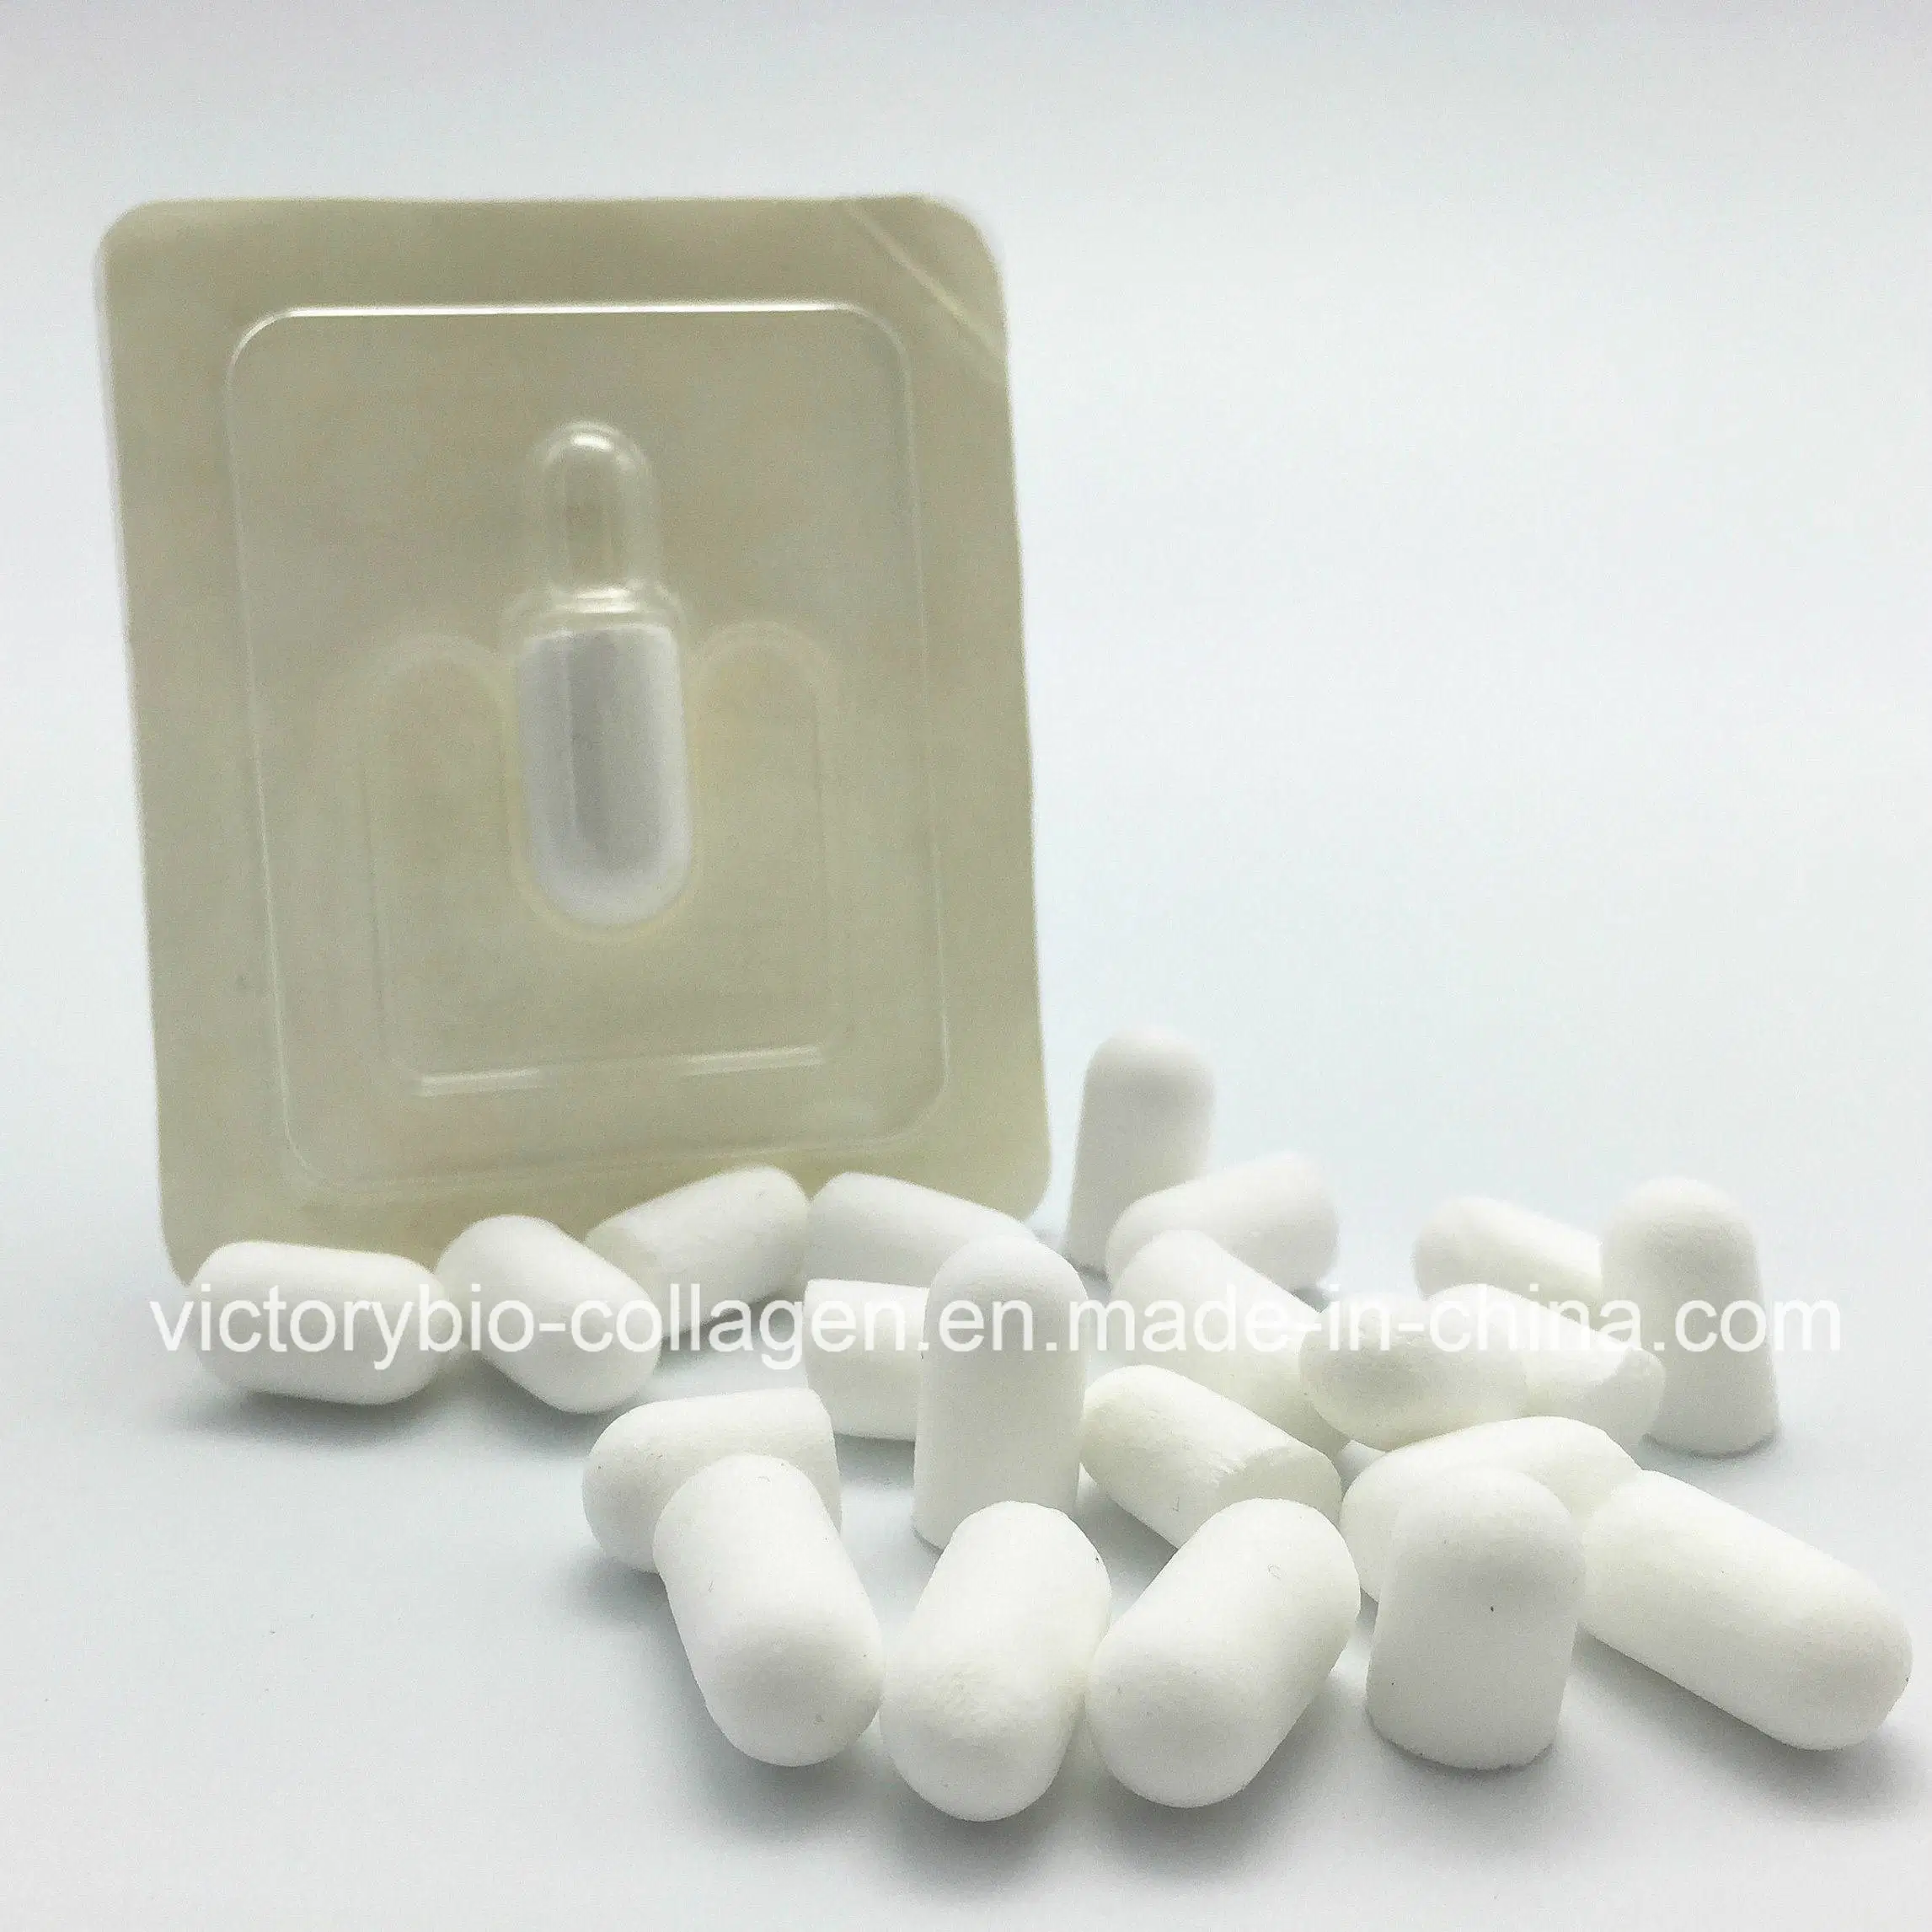 Collagen Wound Dressing Plug for Teeth Extraction